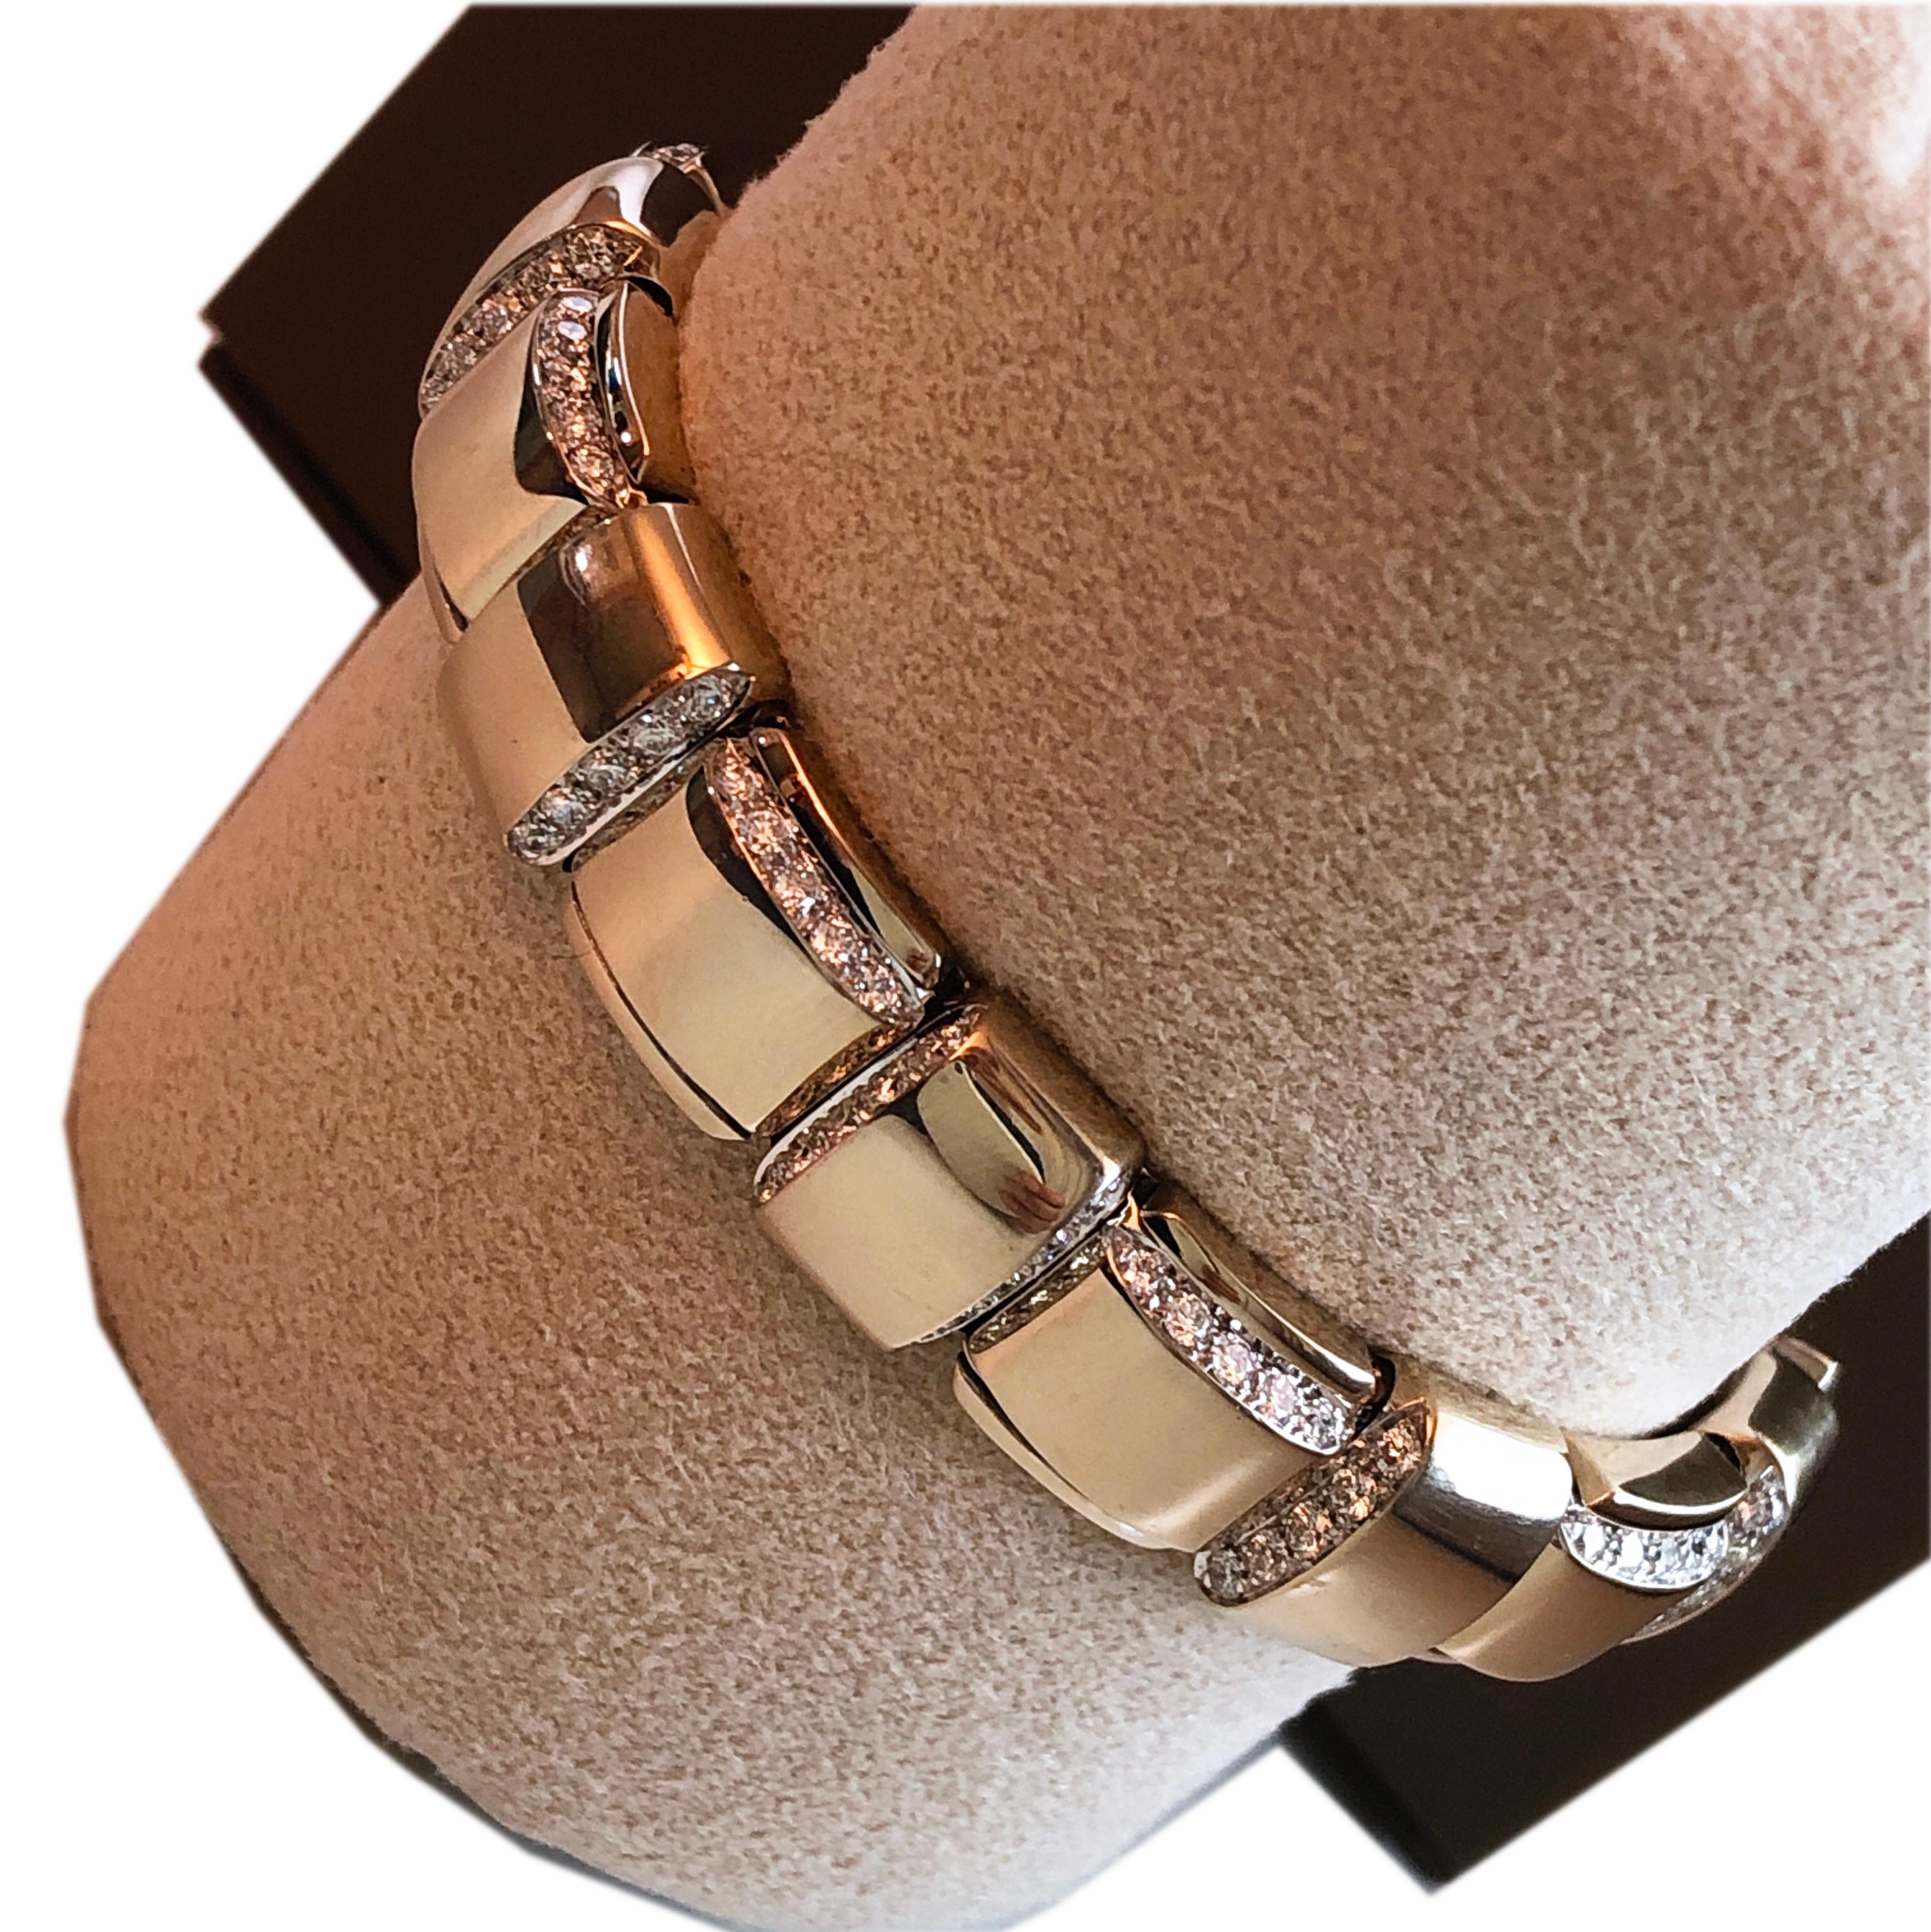 Absolutely Chic yet Timeless, Extraordinary 150(D-E, IF, Collection) 3.48Kt White Diamond, White Gold and Palladium Setting Bracelet .Crafted from braided white gold and palladium this bracelet is a masterpiece from Vhernier's artisans who create